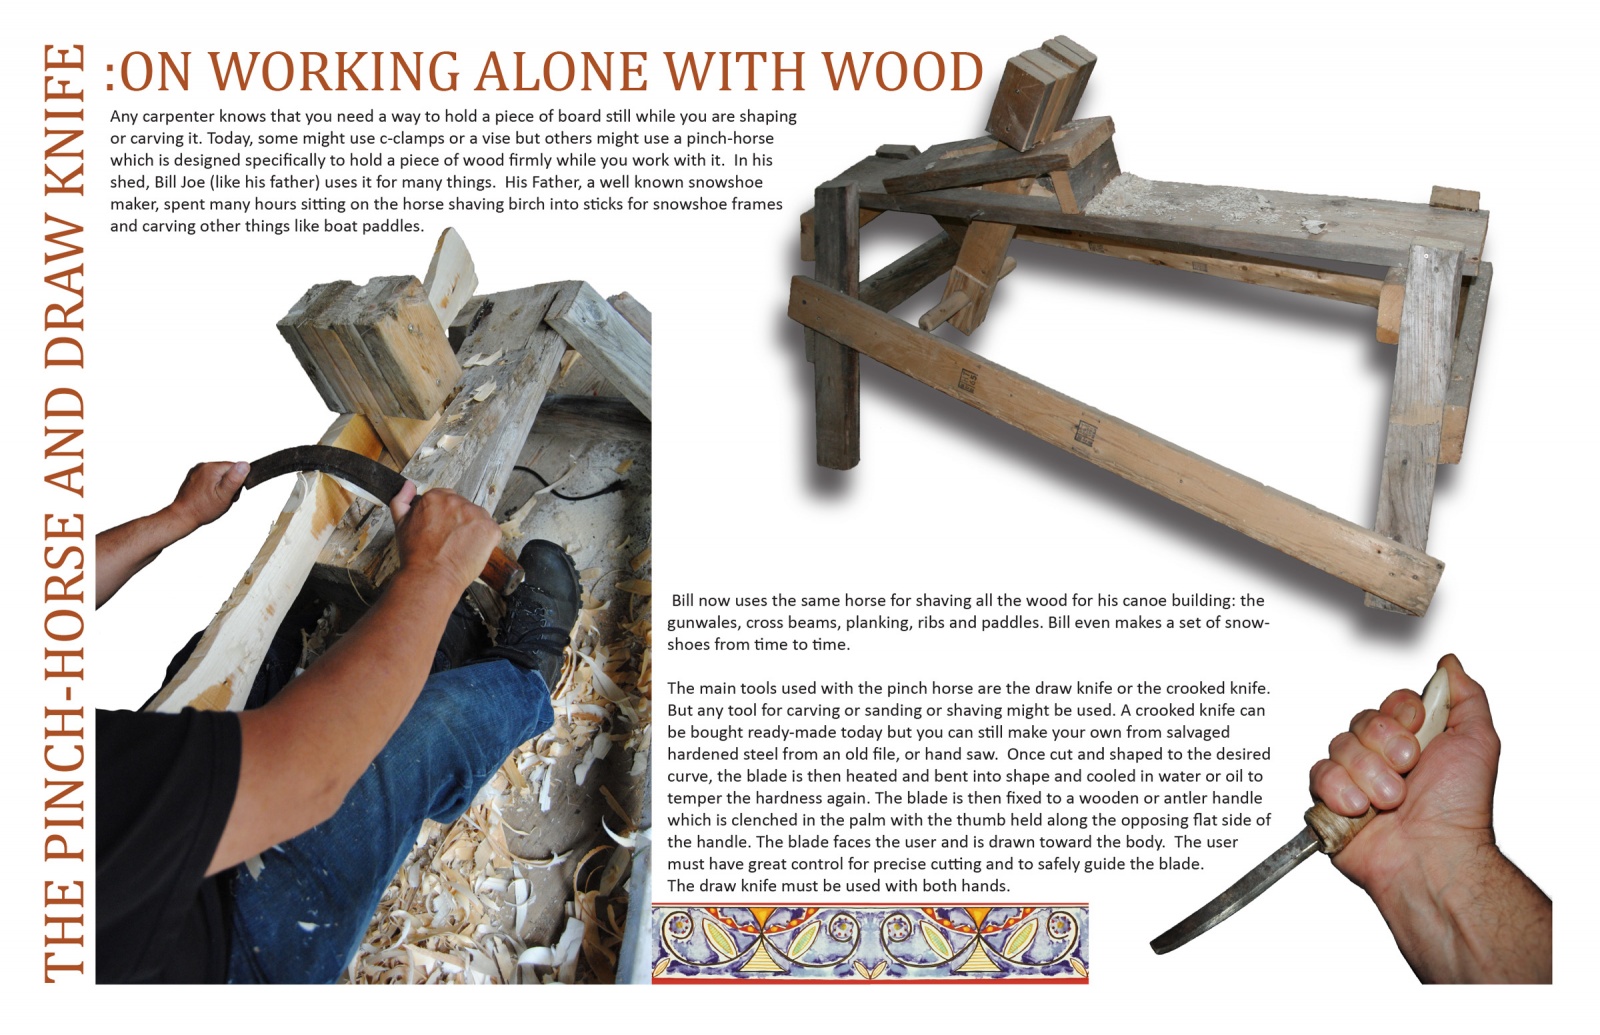 The Pinch-Horse and Draw Knife: On Working Alone with Wood